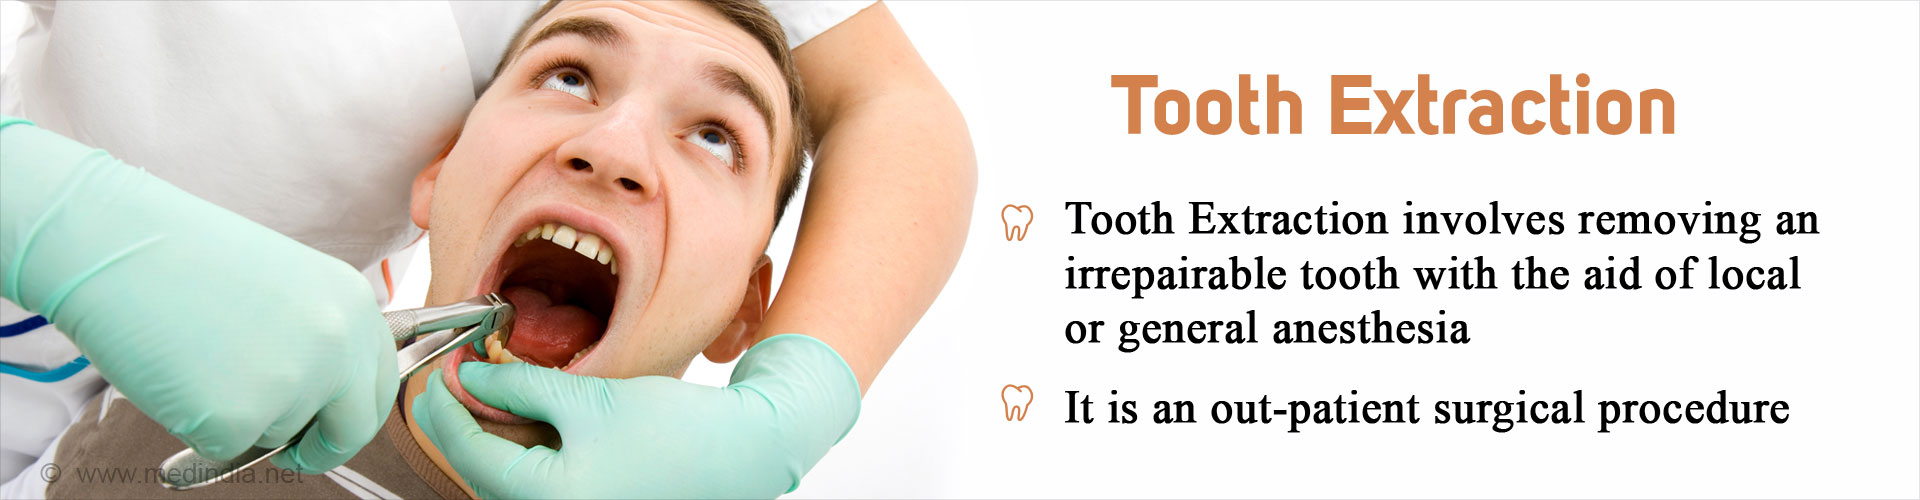 Tooth Extraction
- Tooth extraction is an out-patient surgical procedure
- It involves removing an irreparable tooth with the aid of local or general anesthesia